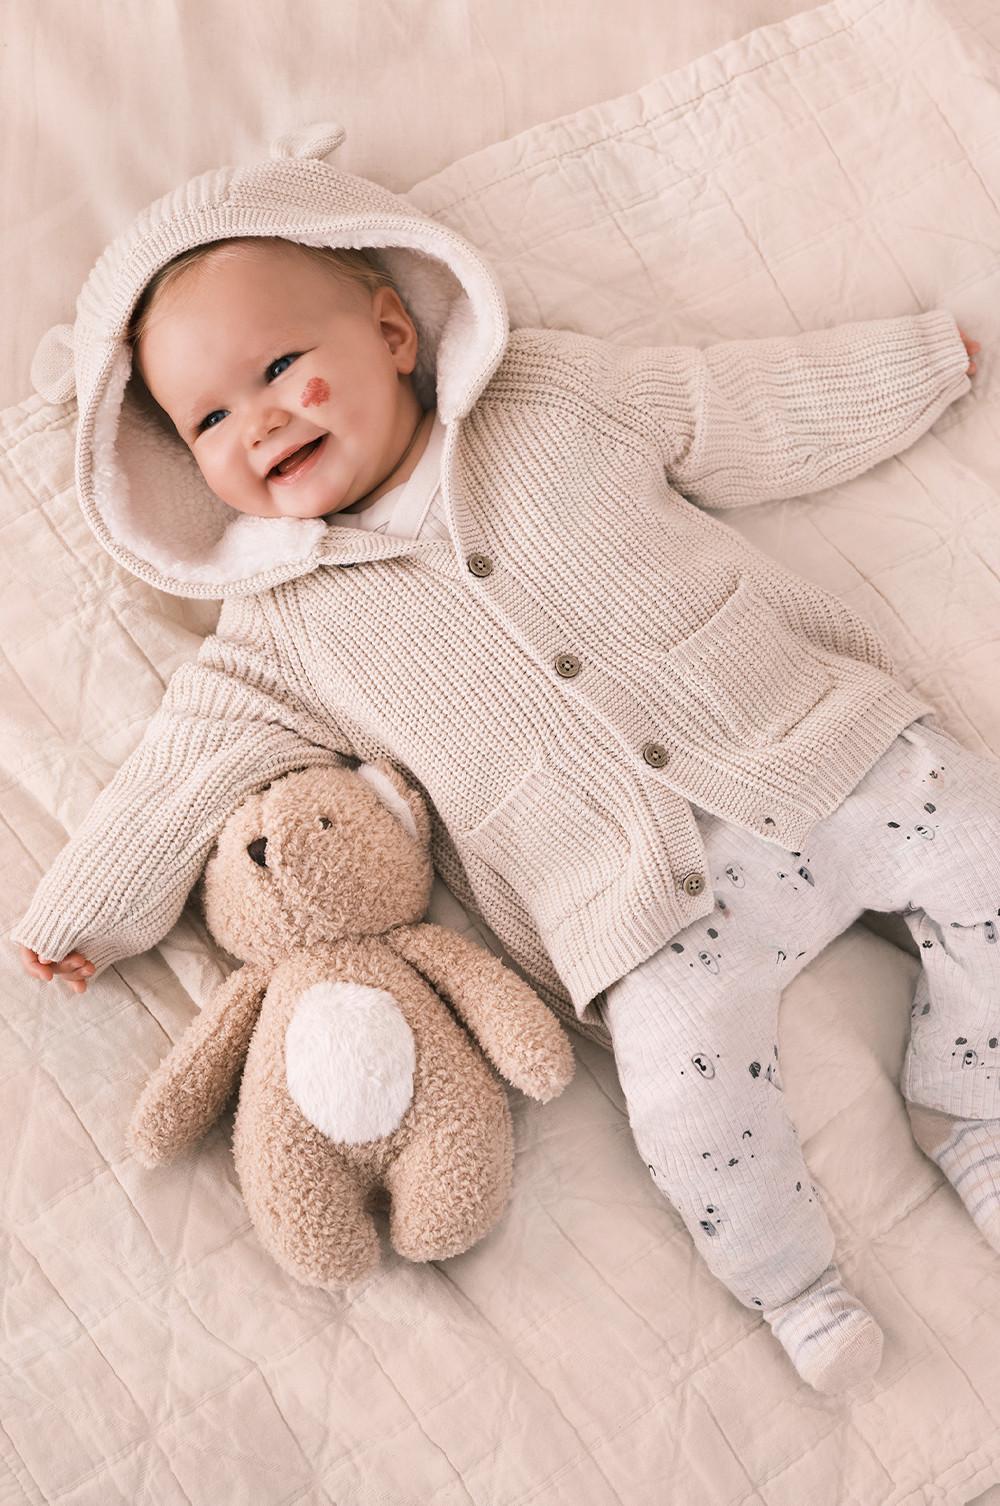 Baby wears knitted cream cardigan with bear ears